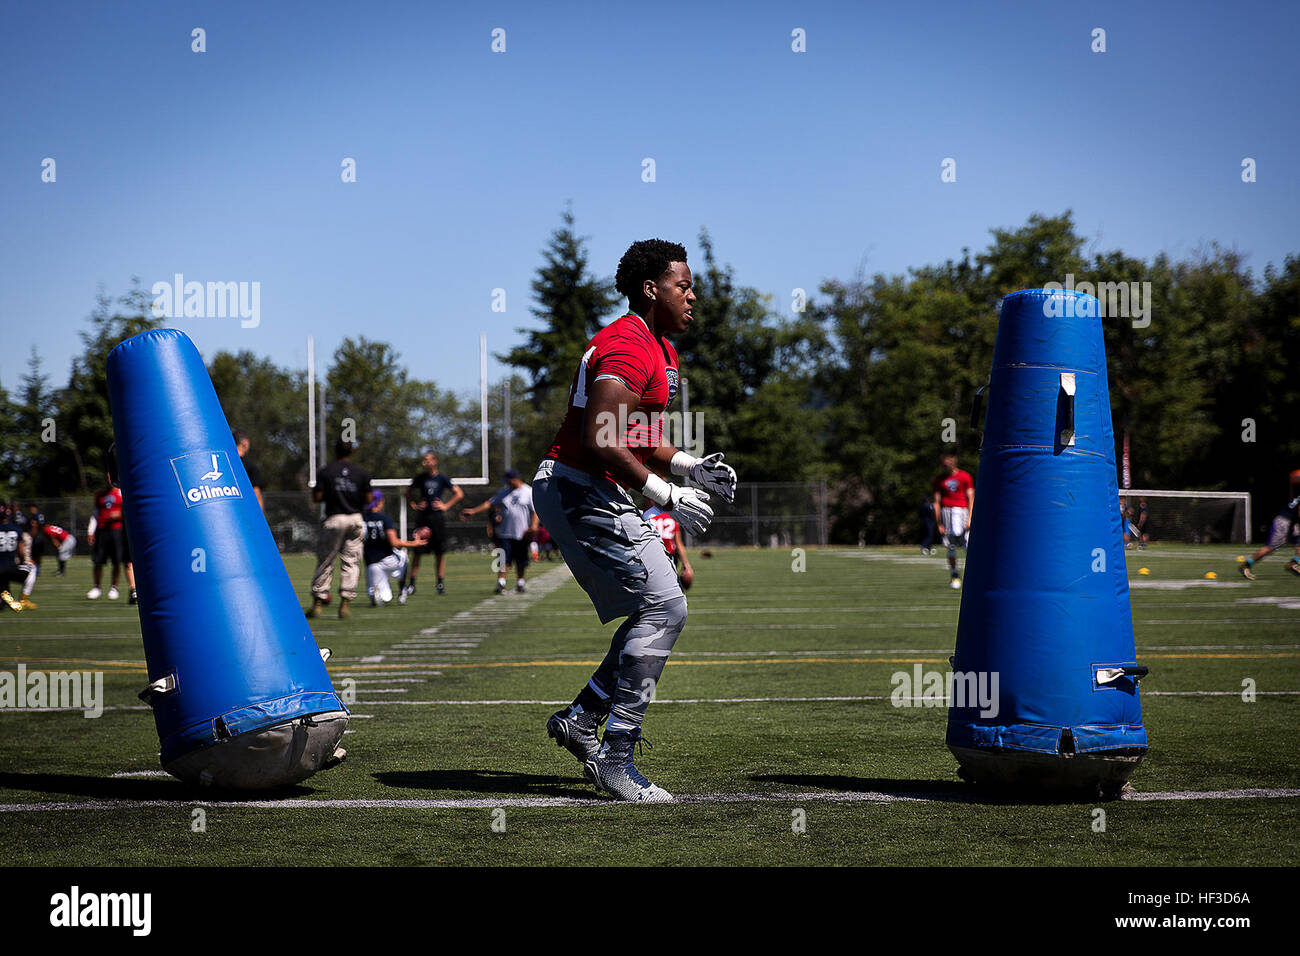 A high school football player runs through a drill during a Semper Fidelis All-American football camp at Hazen High School in Renton, Washington, June 14, 2015. More than 160 players from across Washington State experienced the one-day camp, led by former NFL coaches, local high school coaches and Marines. The camp, which focused on leadership and honor both on and off the field, leads up to the Semper Fidelis All-American Bowl game, which will be played in California in January 2016. (U.S. Marine Corps photo by Sgt. Reece Lodder) Seattle Marines, NFL coaches host football camp in Renton 15061 Stock Photo